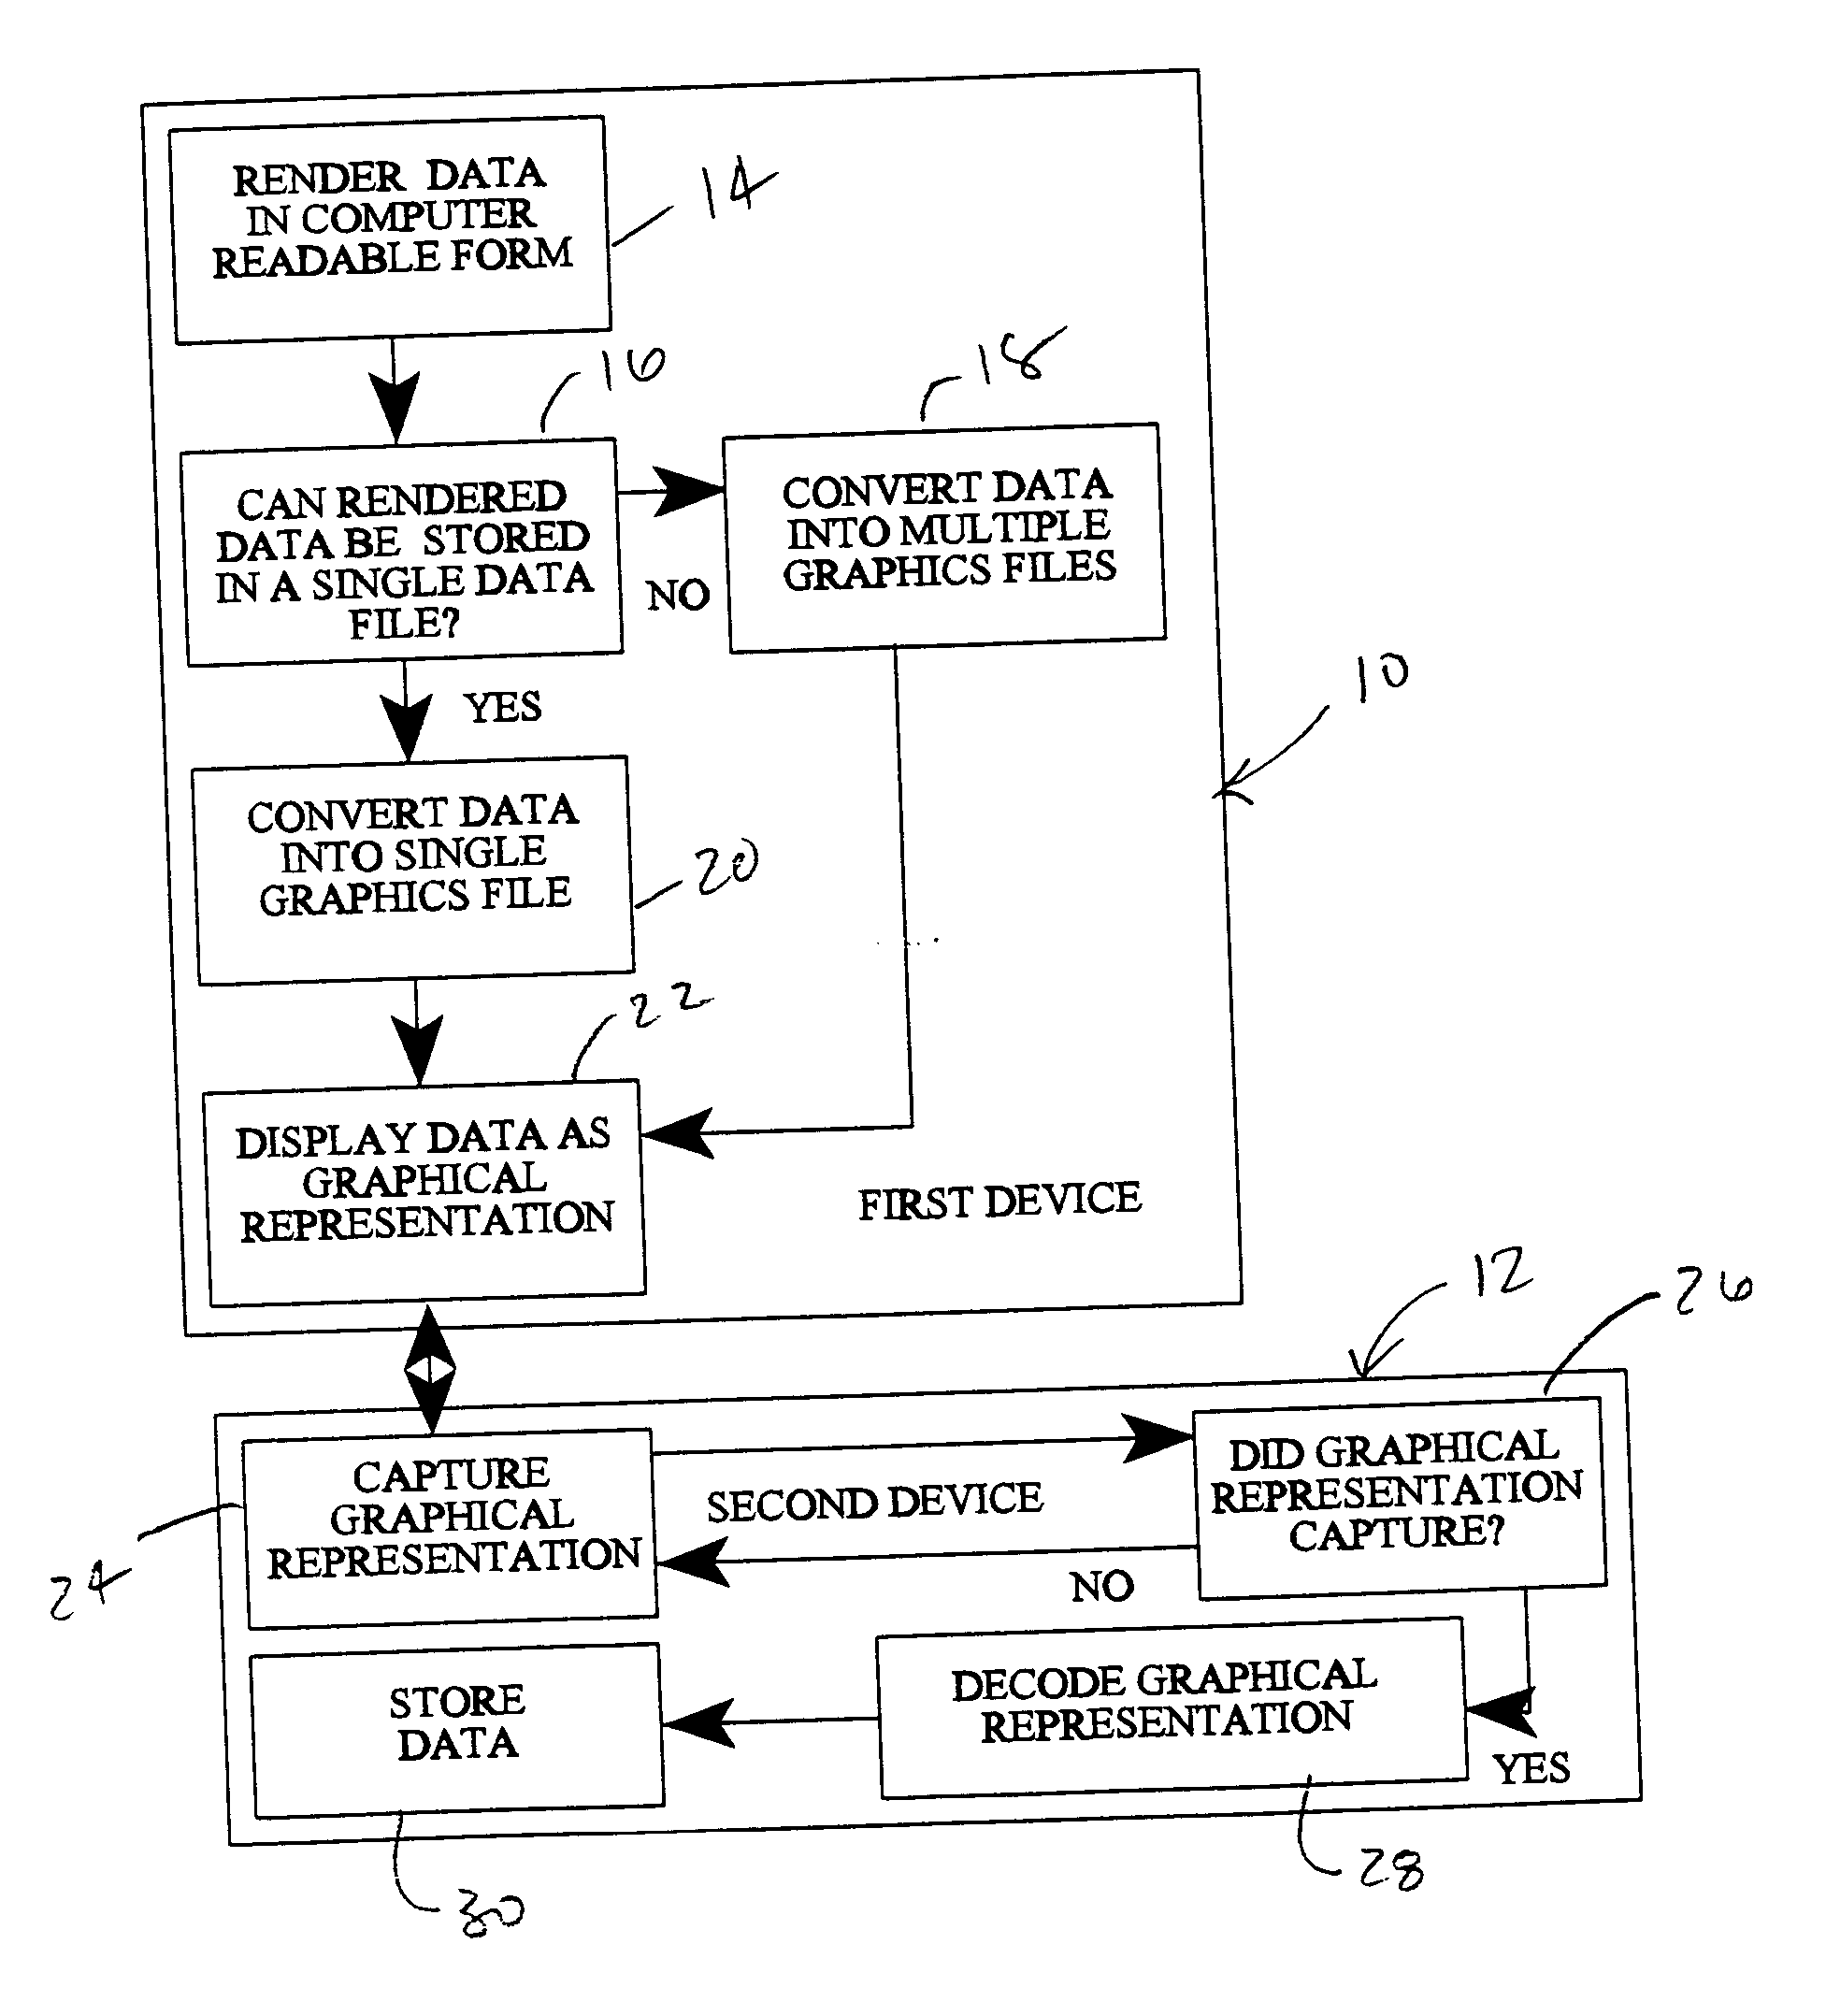 Method for transferring data objects between portable devices